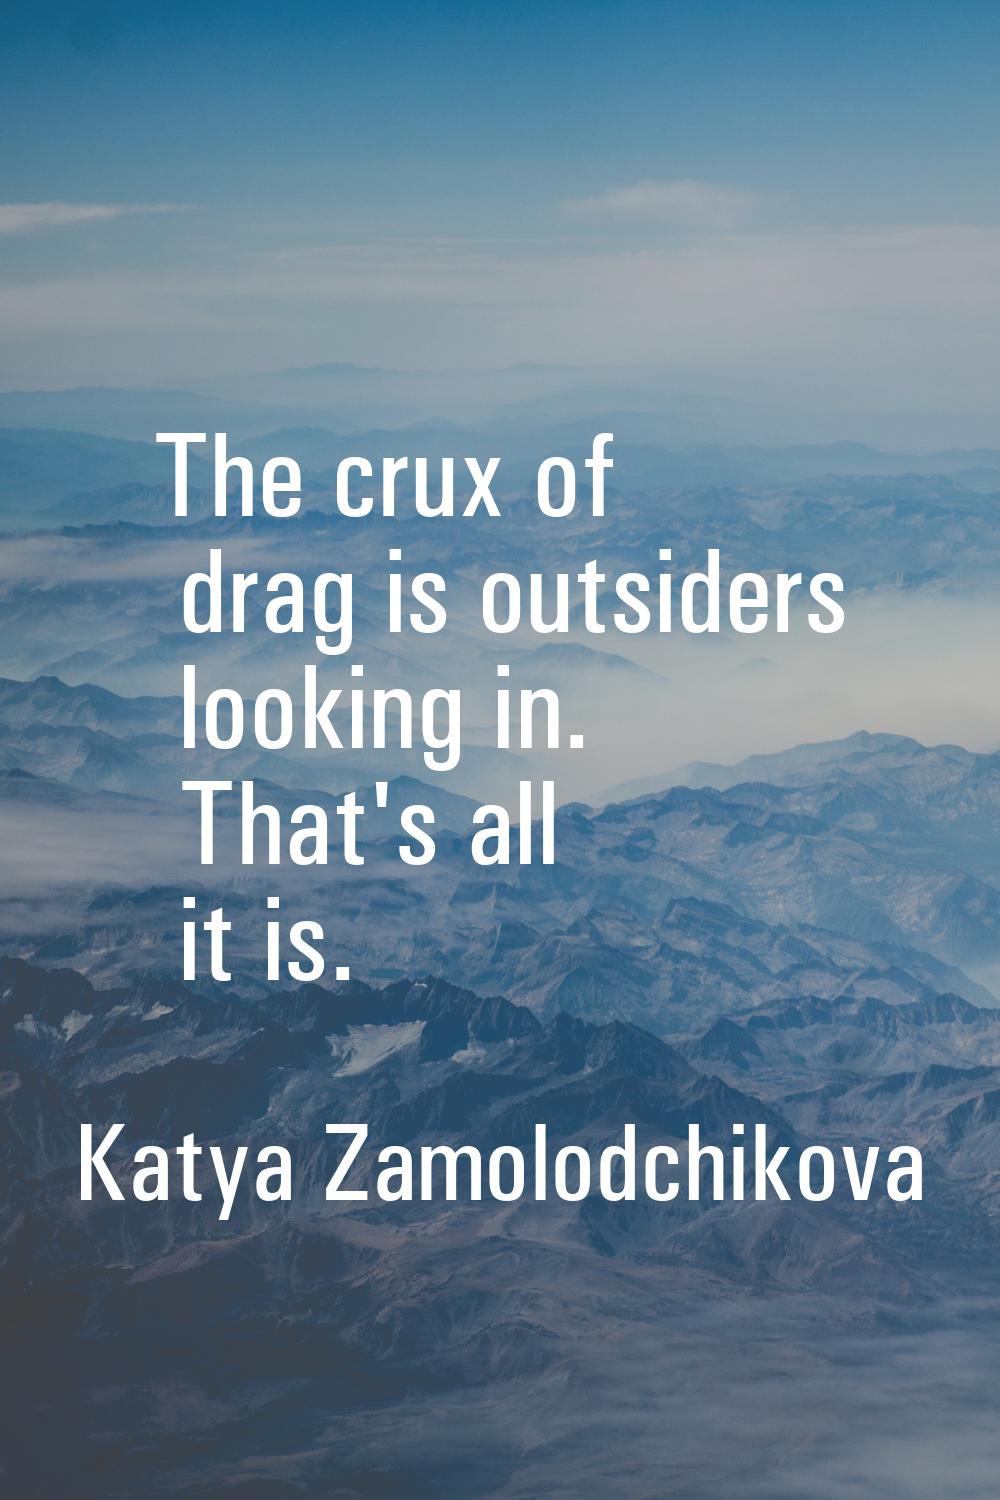 The crux of drag is outsiders looking in. That's all it is.